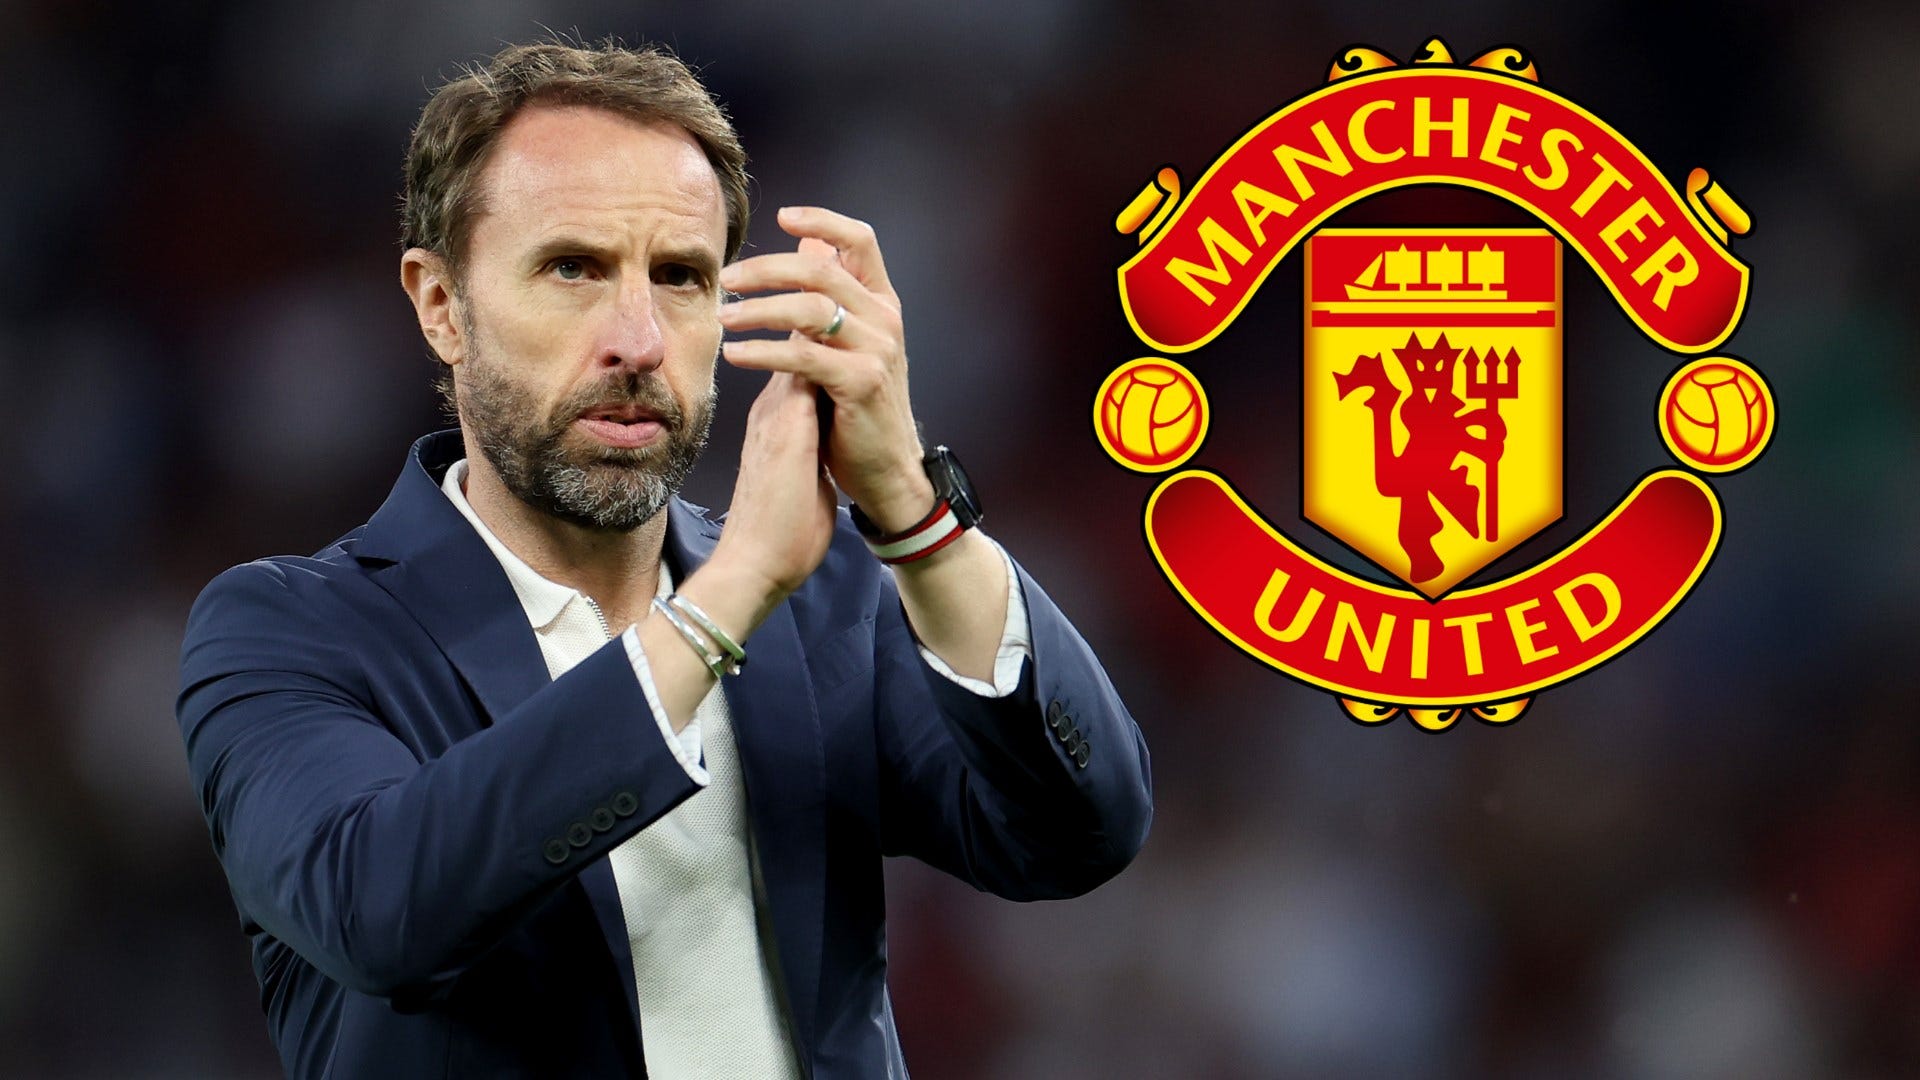 ‘What are they smoking?!’ - Man Utd fans go berserk at Gary Neville & Roy Keane for ringing Gareth Southgate endorsement as they call for ‘Big Sam’ to be brought in instead